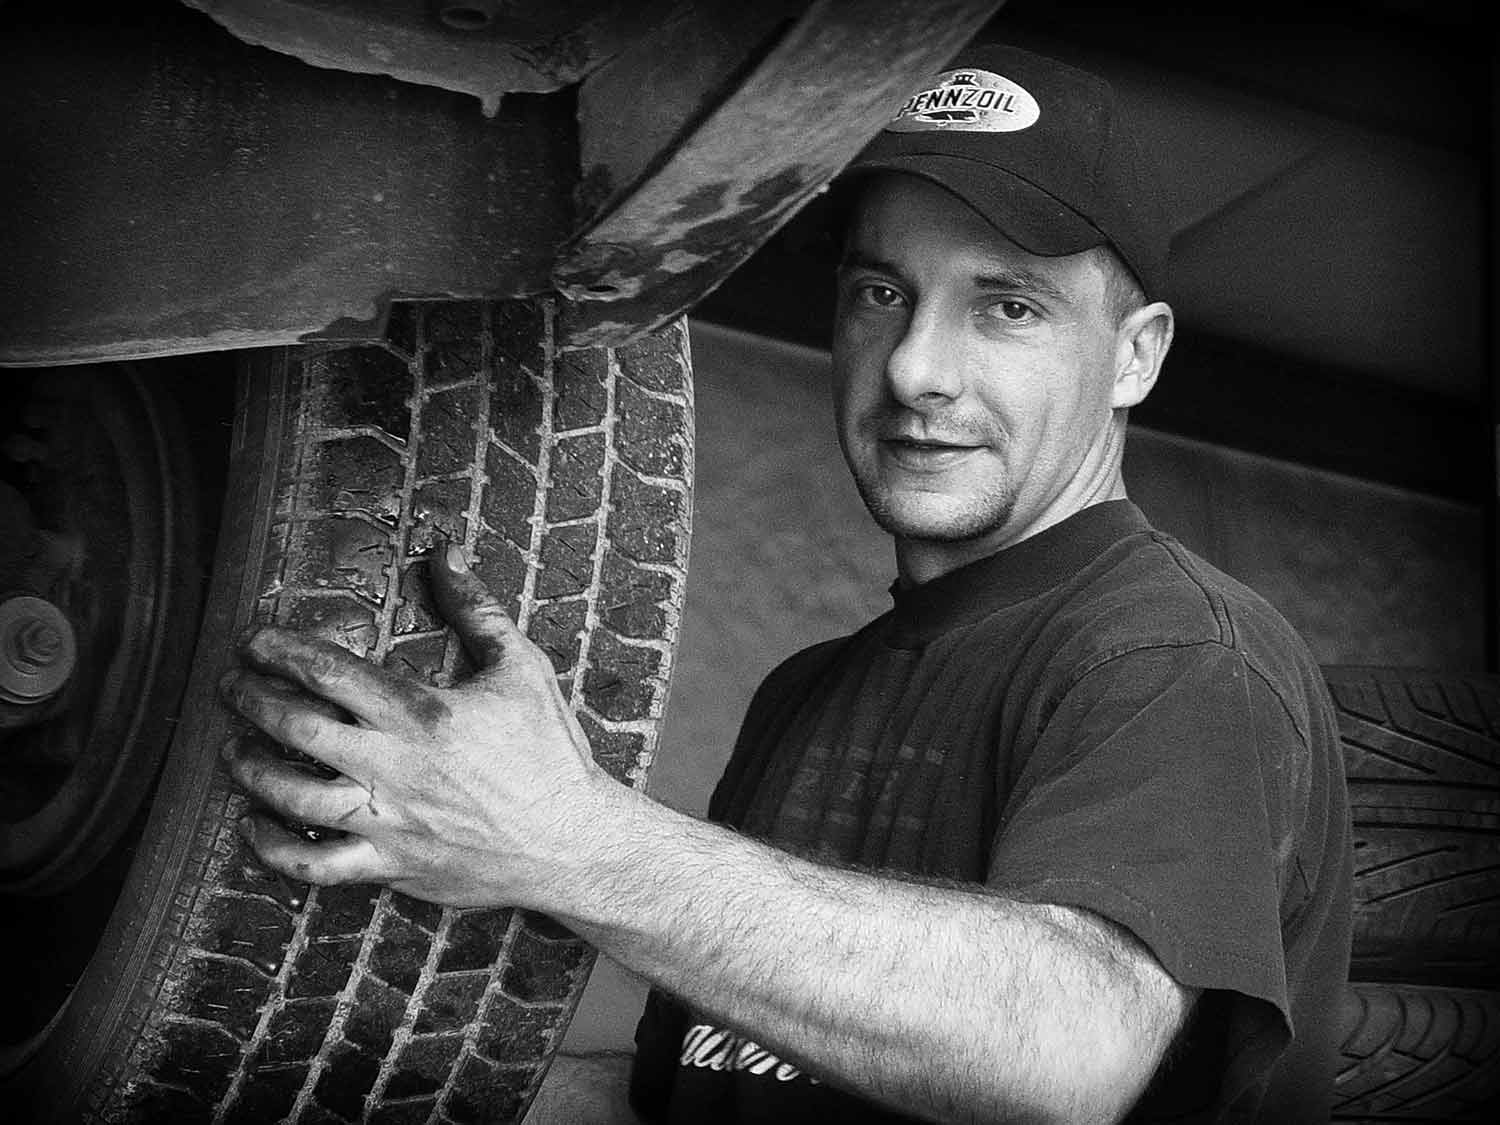 John Womble removes tires from a car at Minton’s Tire Service. Photo by Kristi Davis - 2006